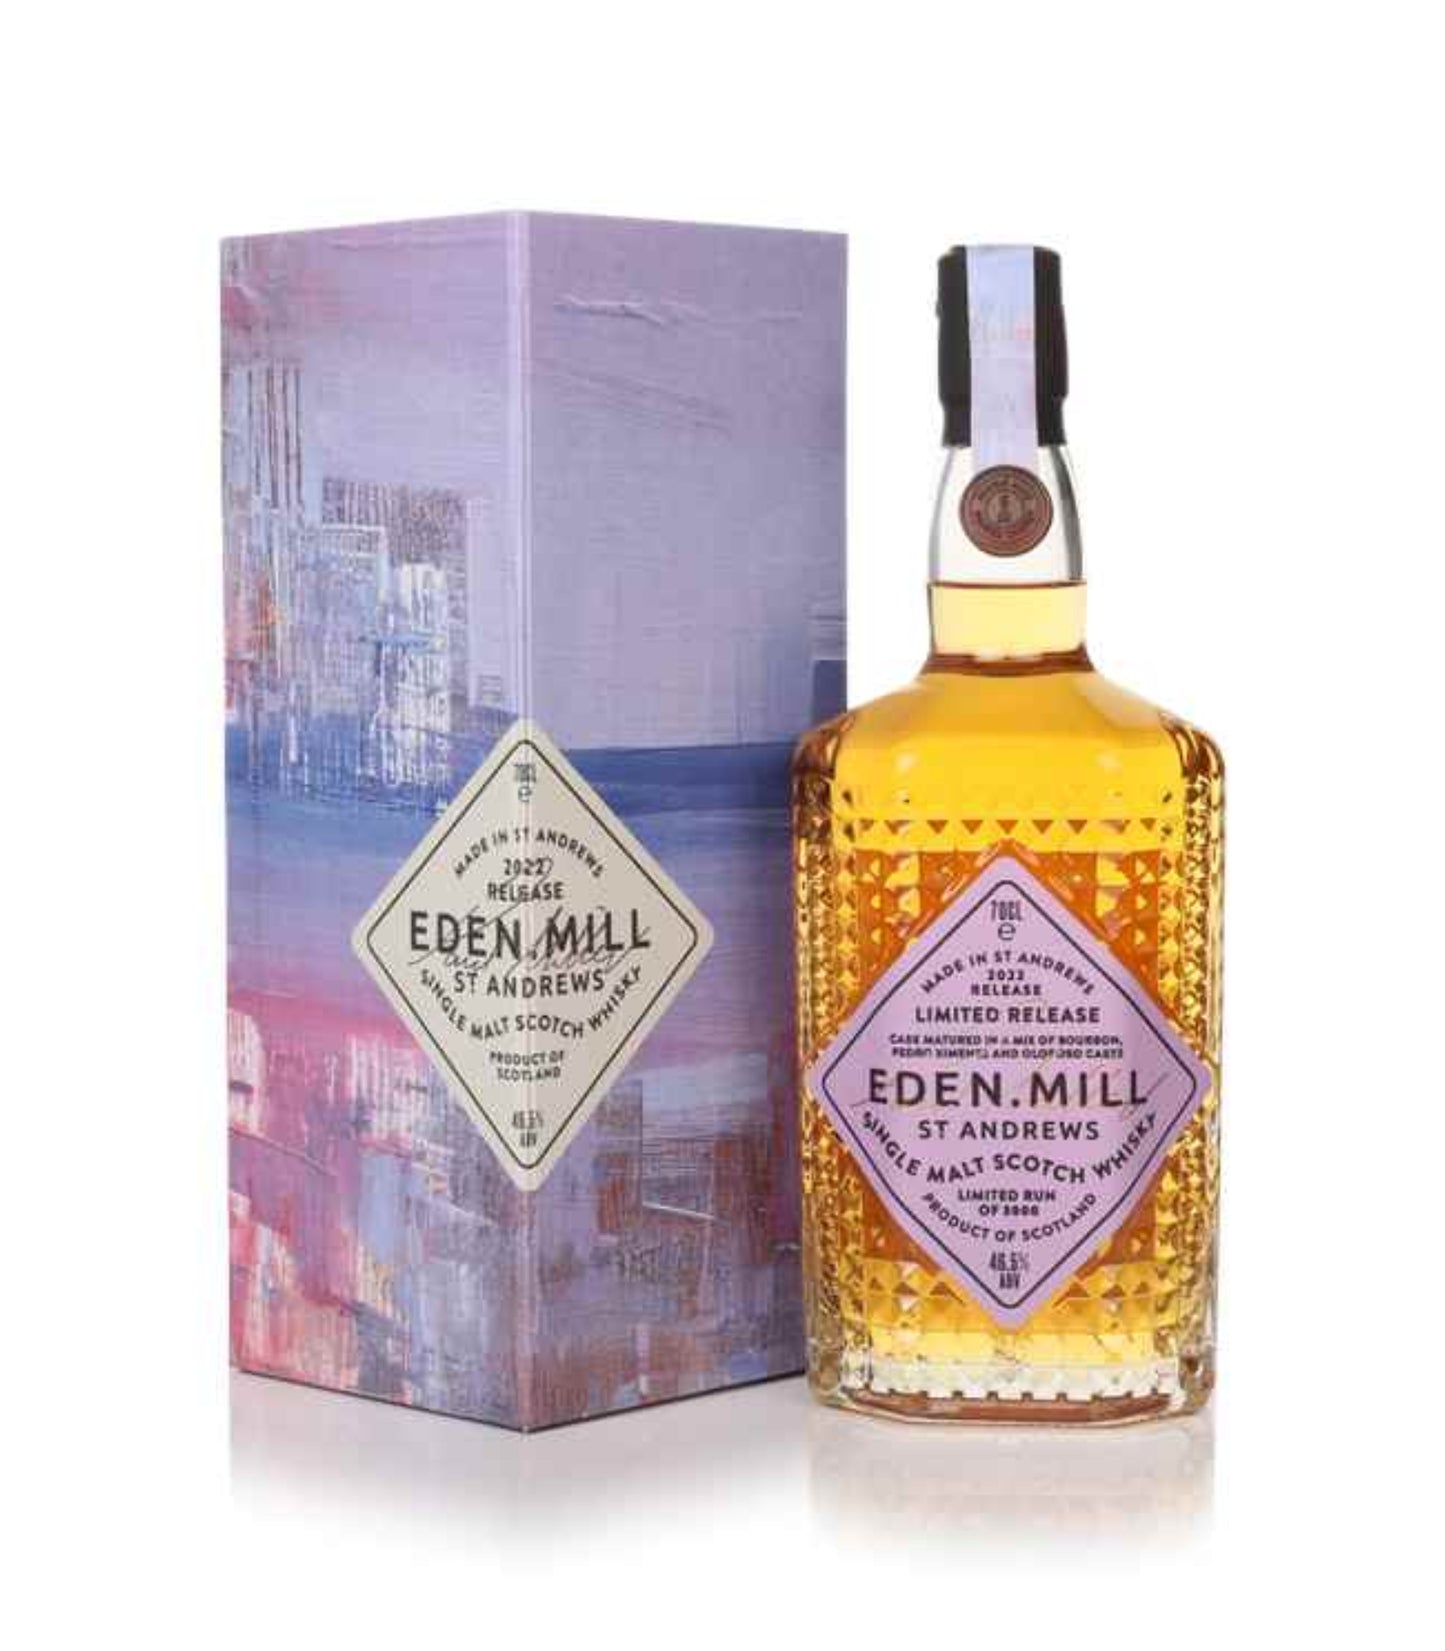 Eden Mill Single Malt Scotch Whisky 2022 Release - Art of St Andrews Collection (70cl, 46.5%)